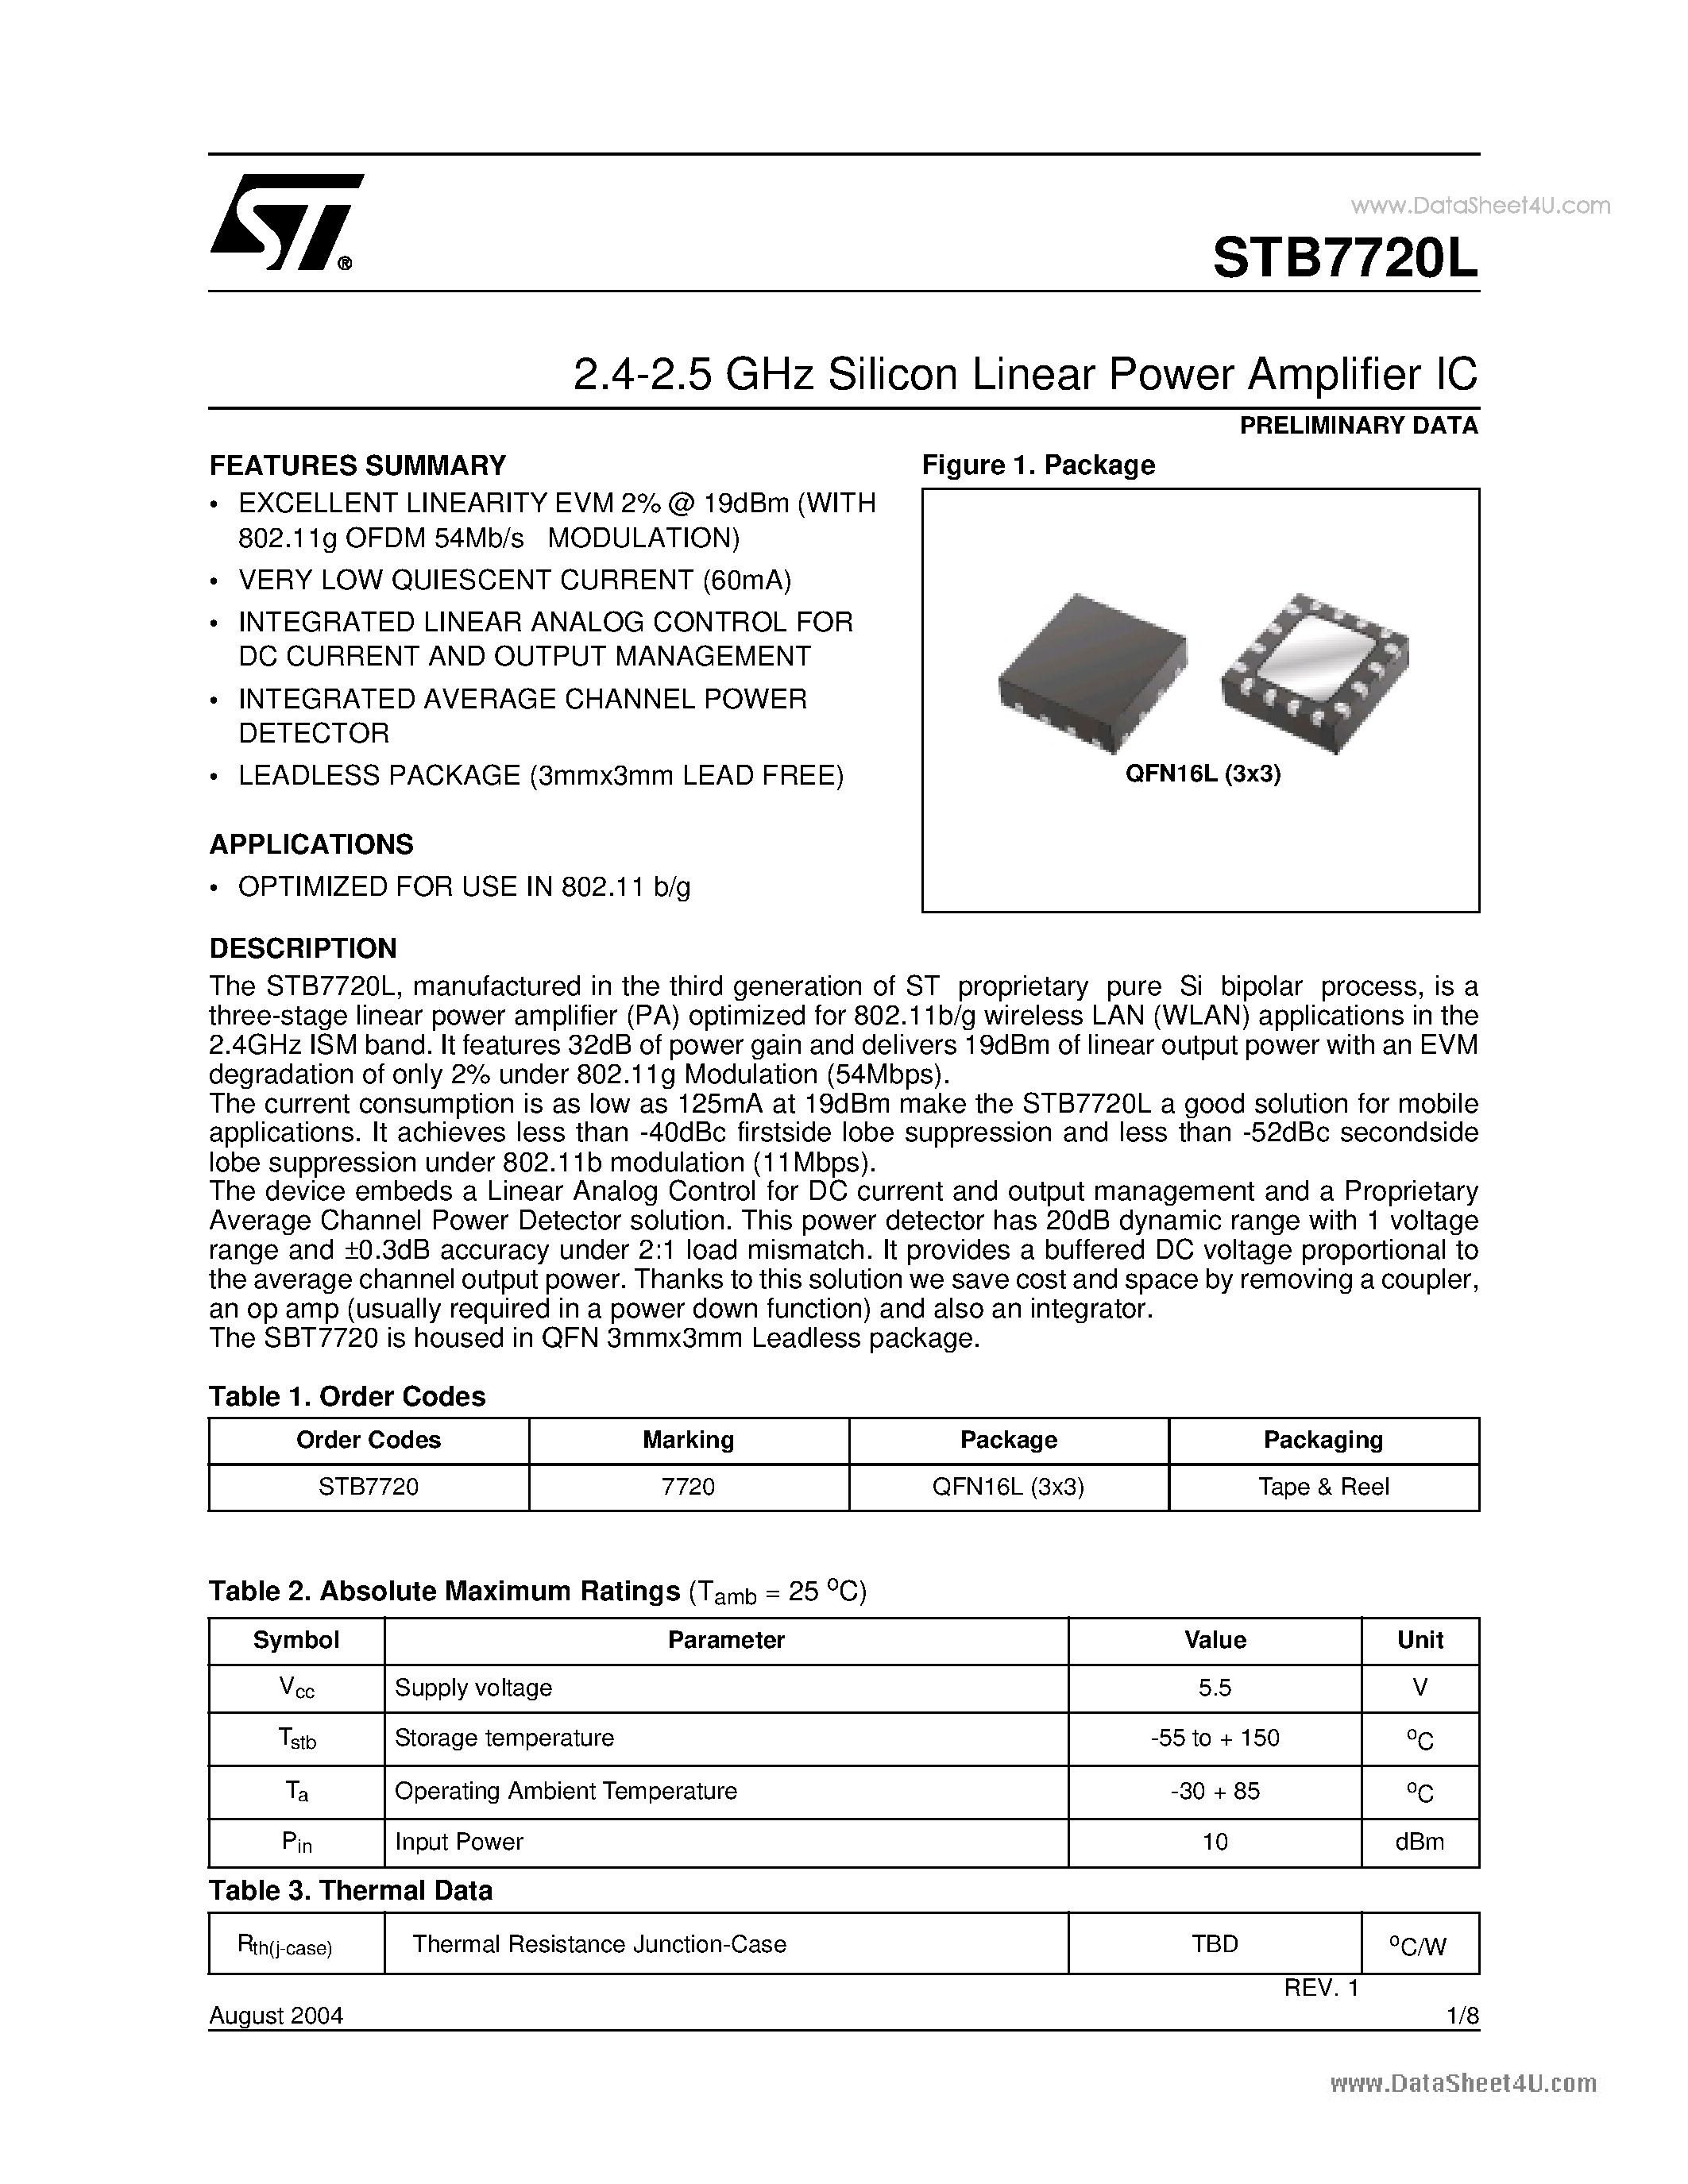 Даташит STB7720L - 2.4-2.5 GHz Silicon Linear Power Amplifier IC страница 1